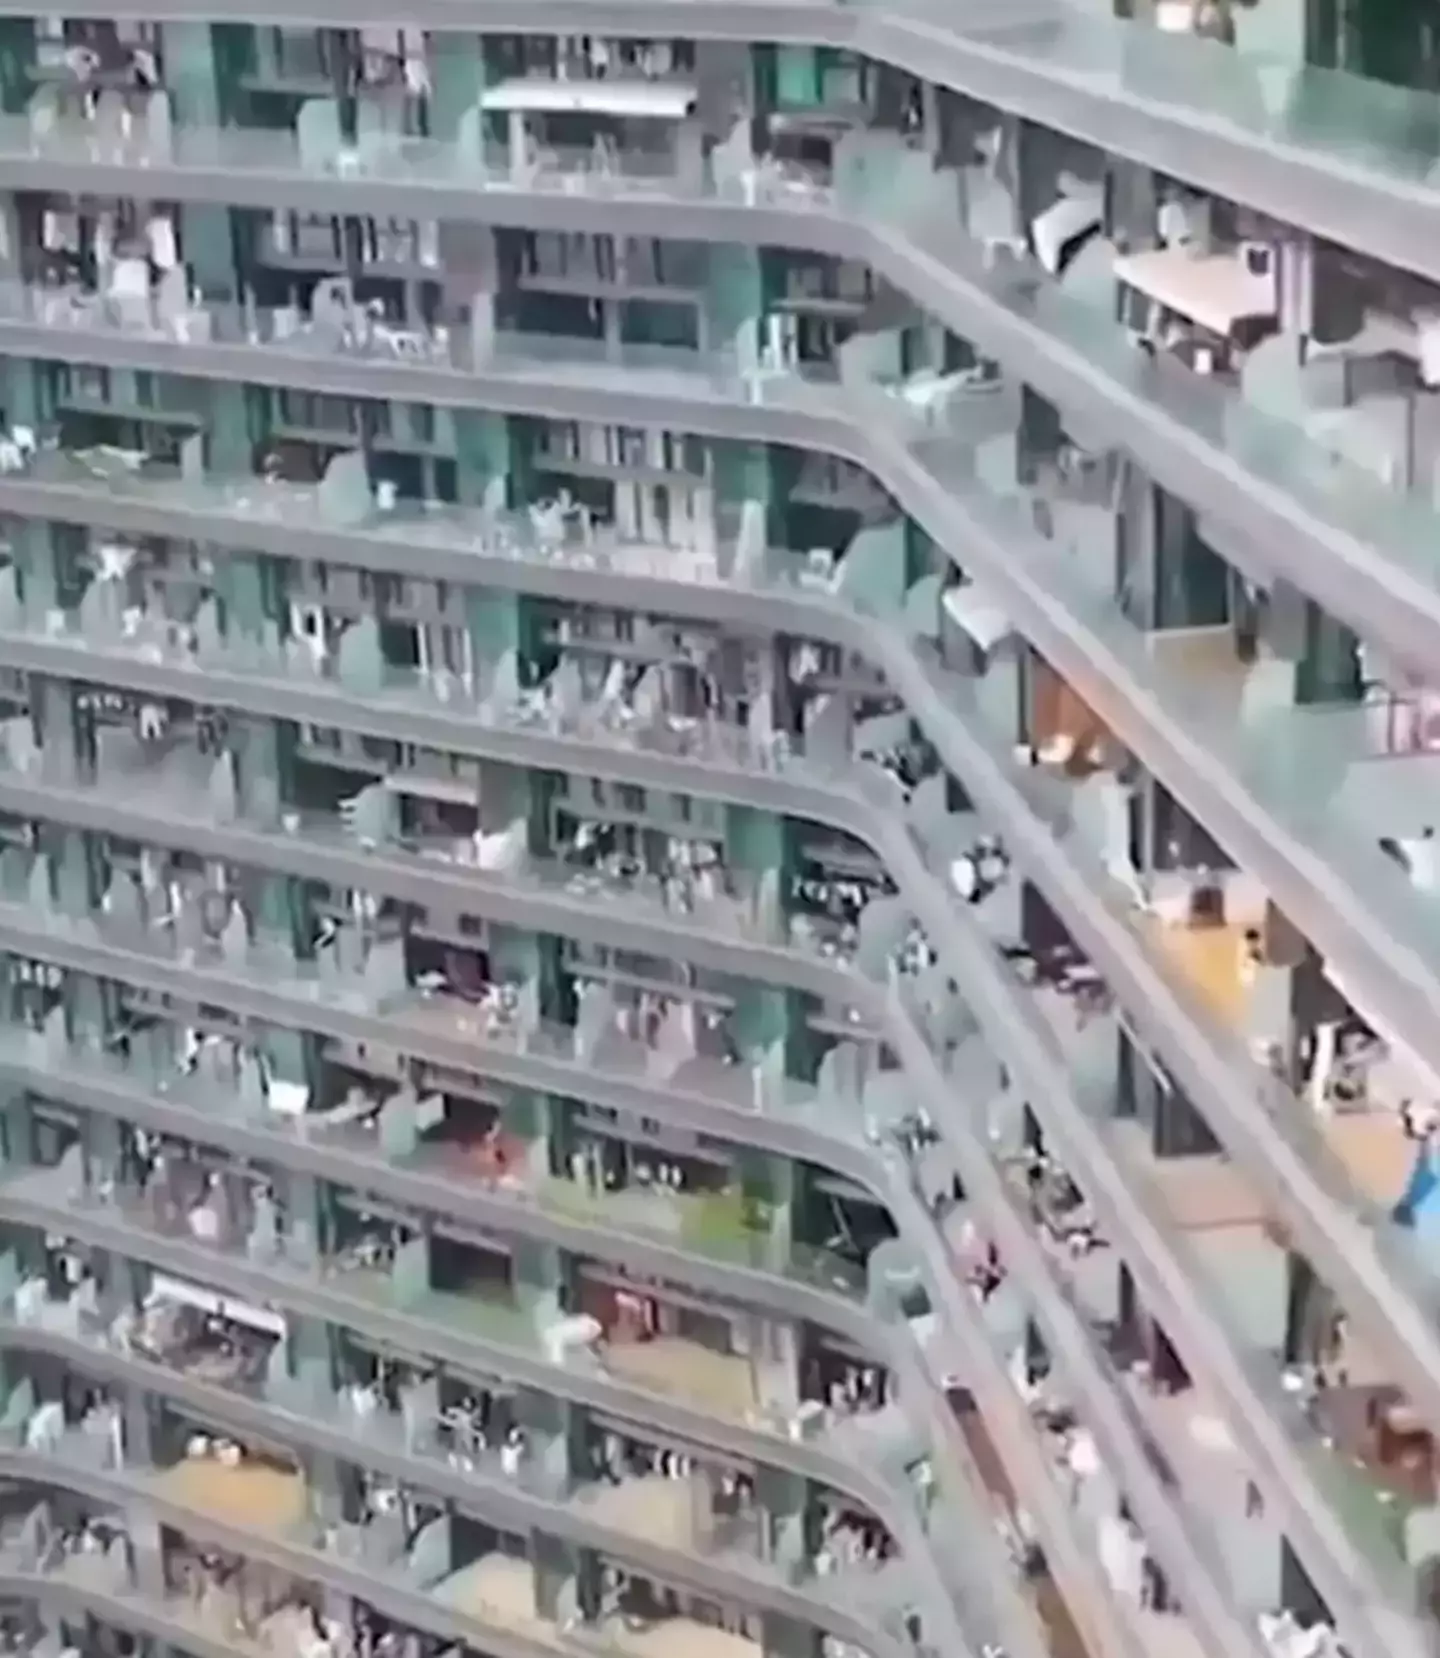 The apartment building has 20,000 residents.